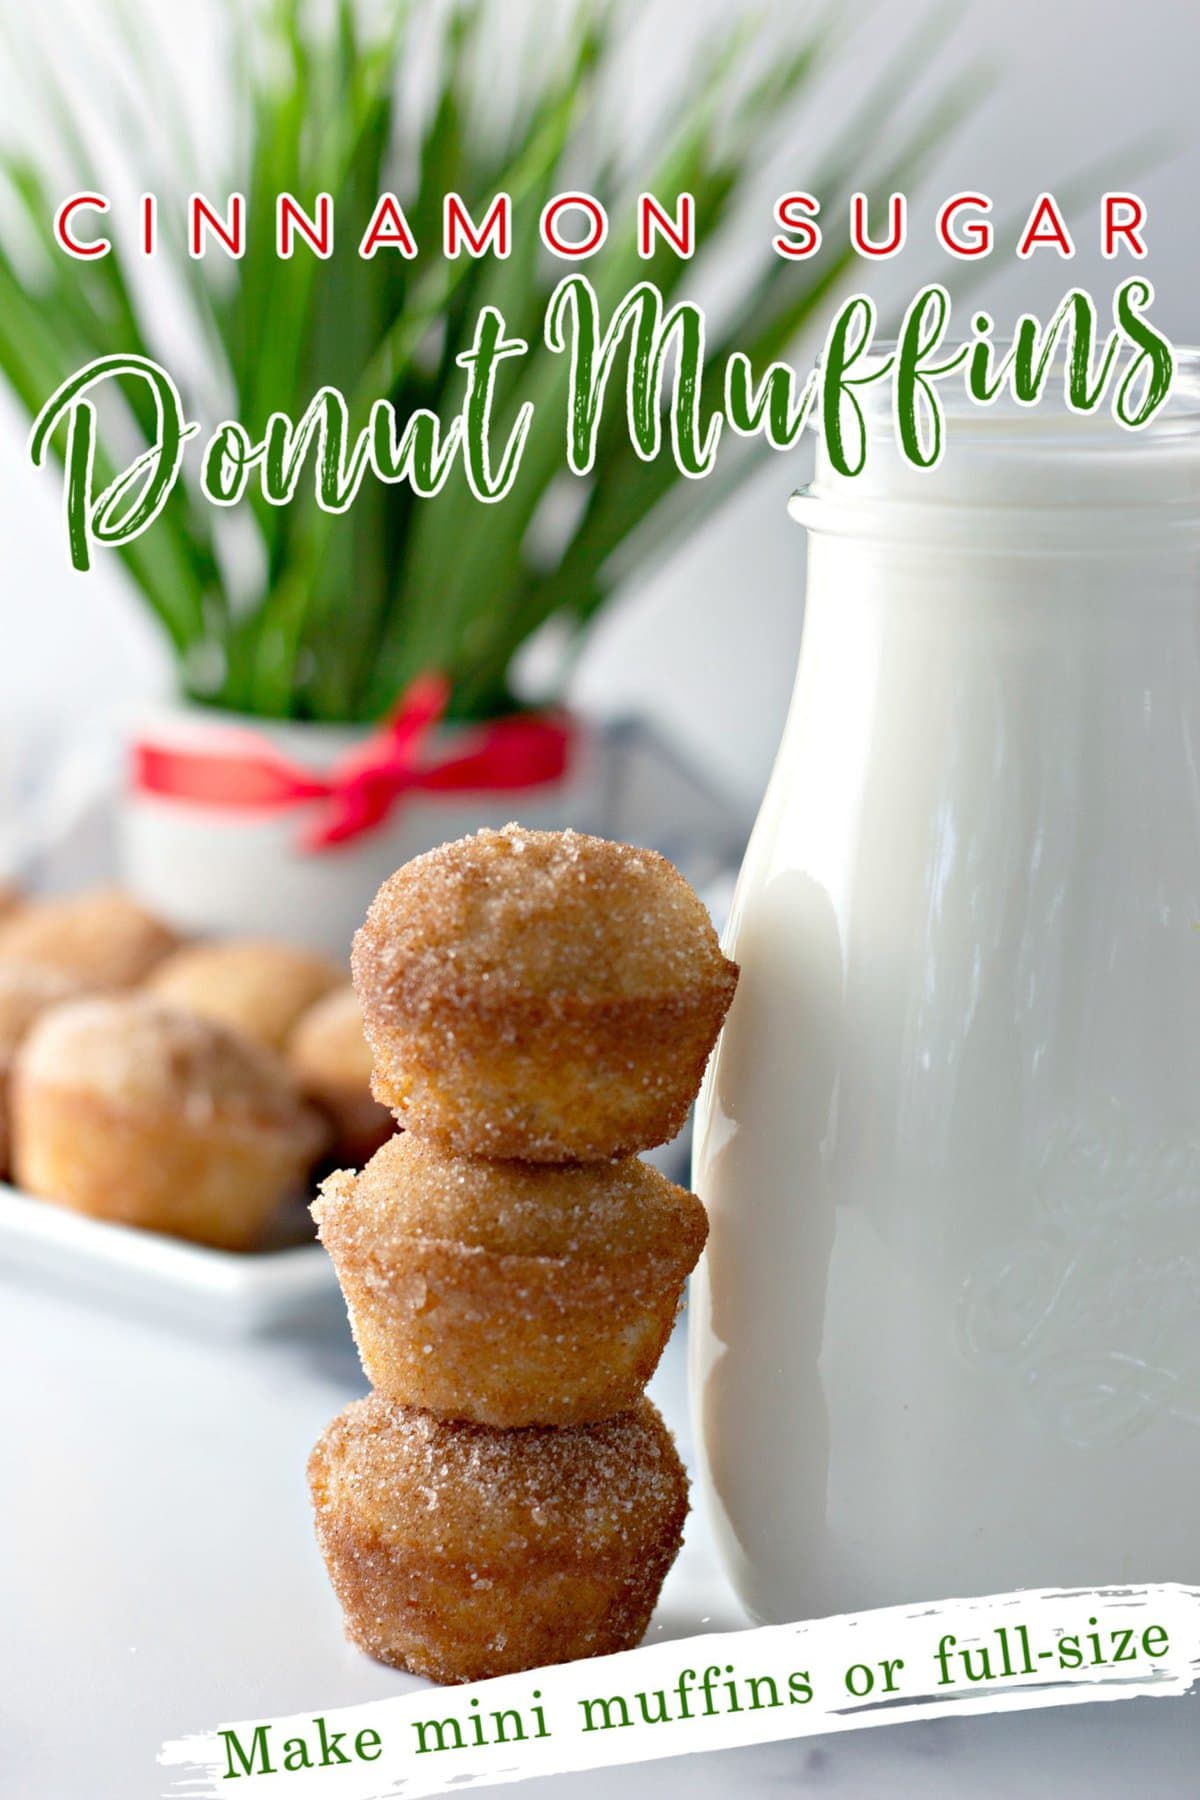 Three cinnamon sugar donut muffins stacked on top of each other beside a cold glass of milk with a plant in the background